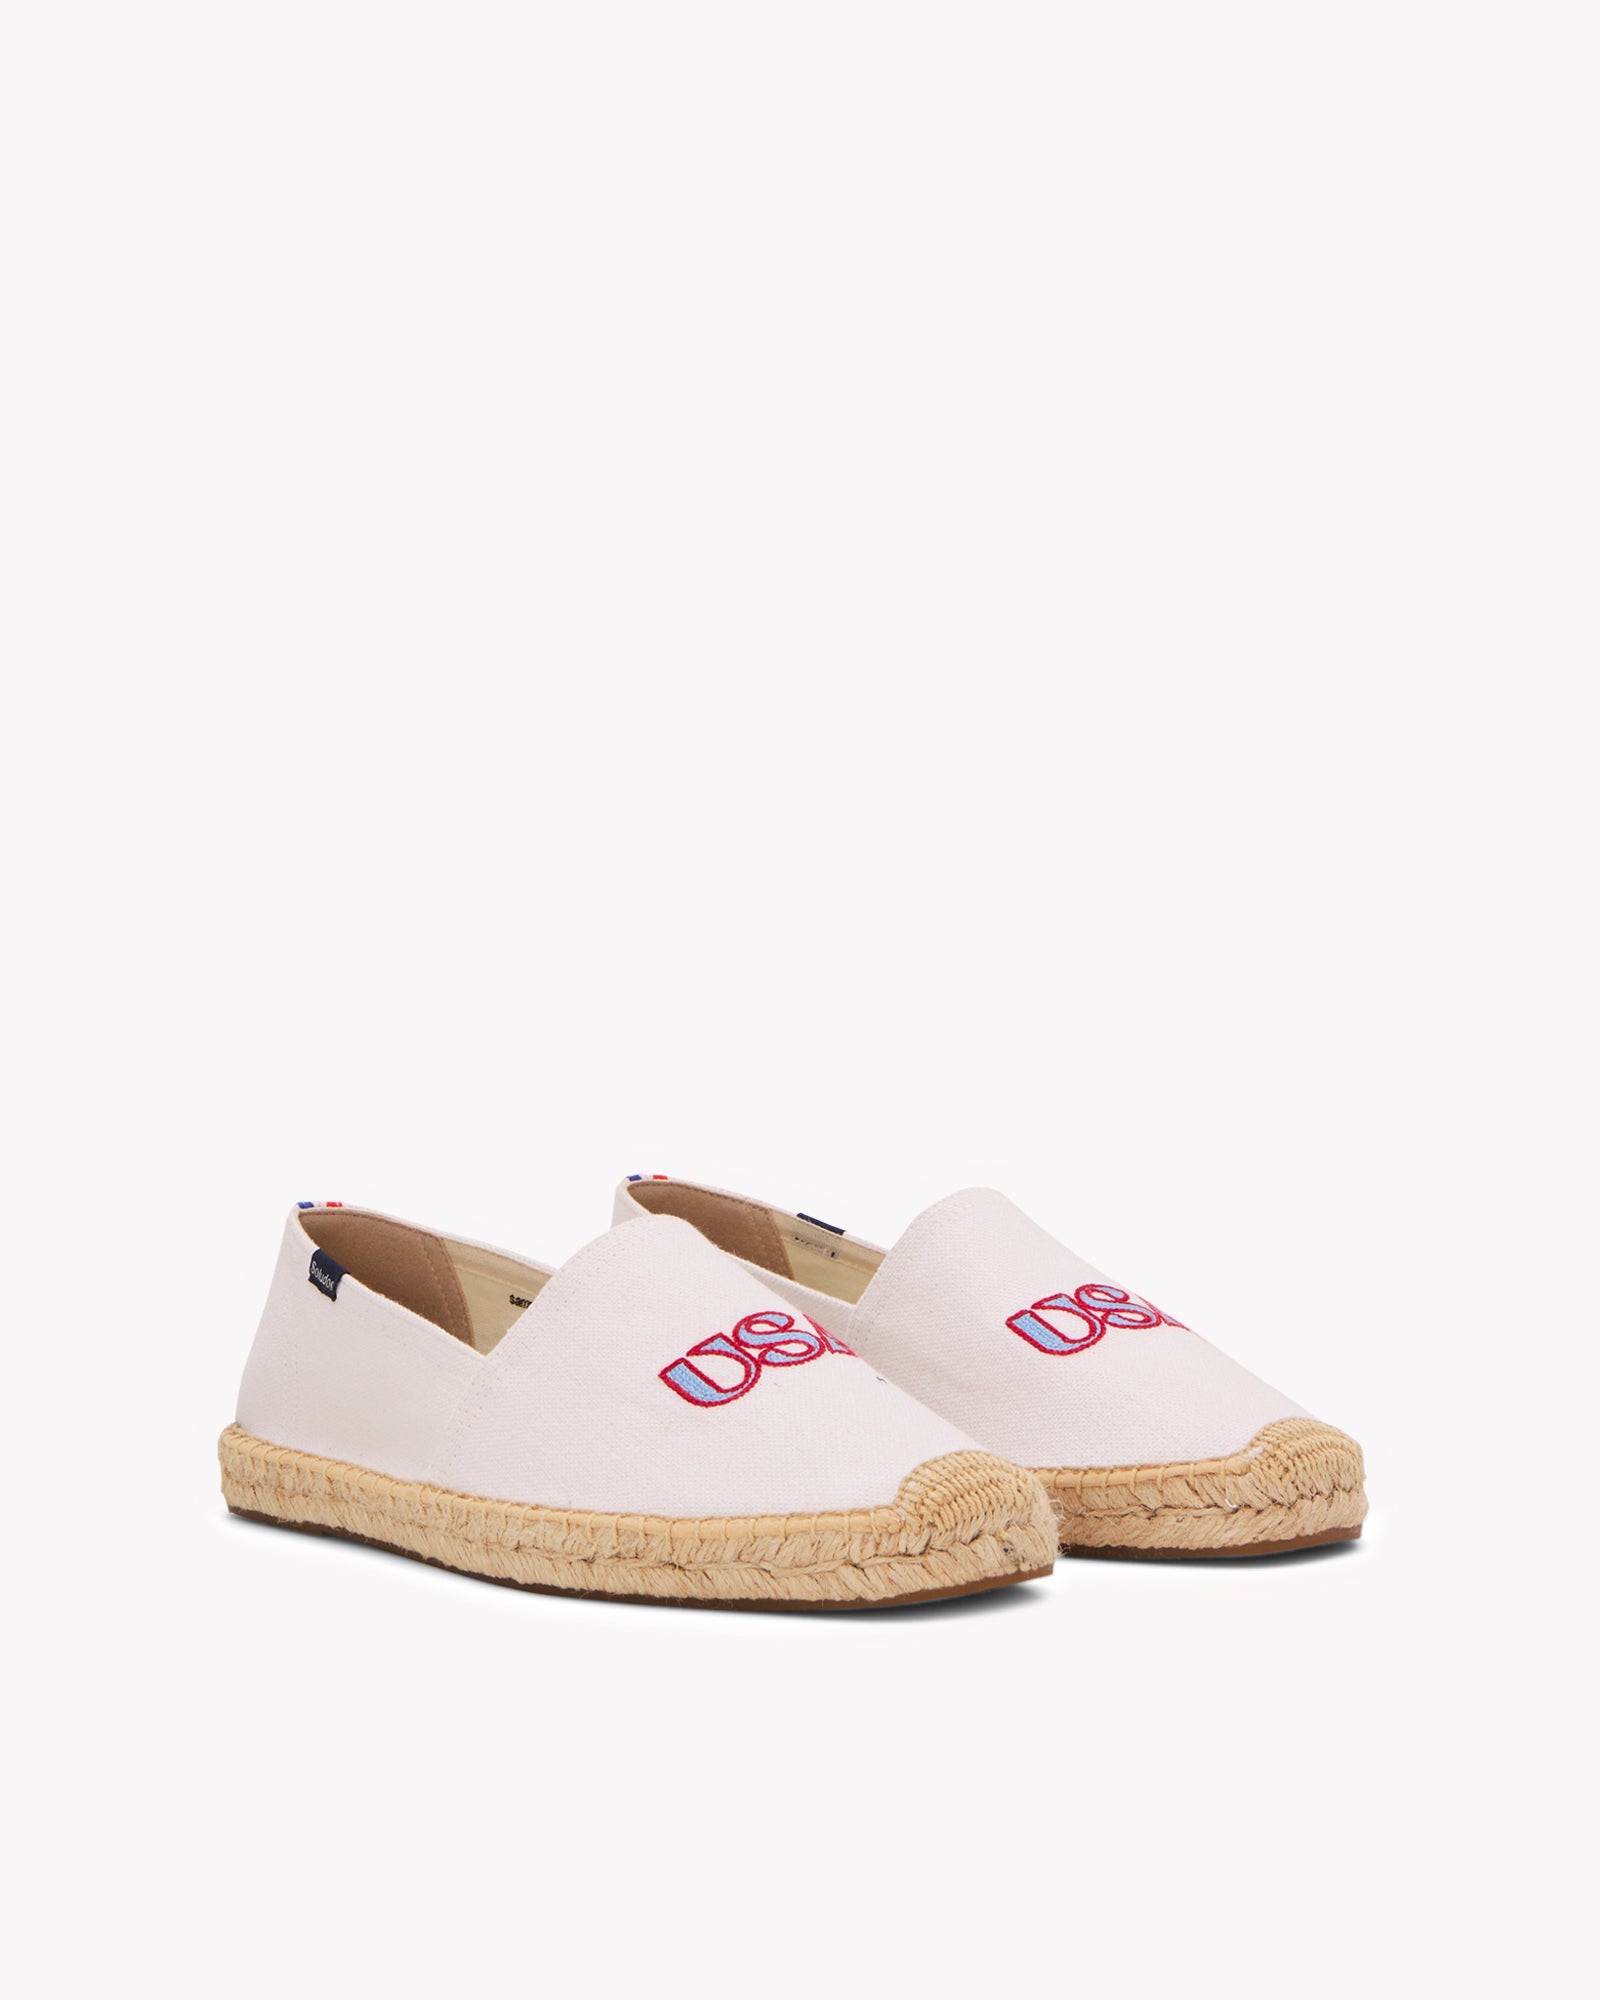 Angled front view of men's USA embroidery espadrille in white with blue and red embroidery